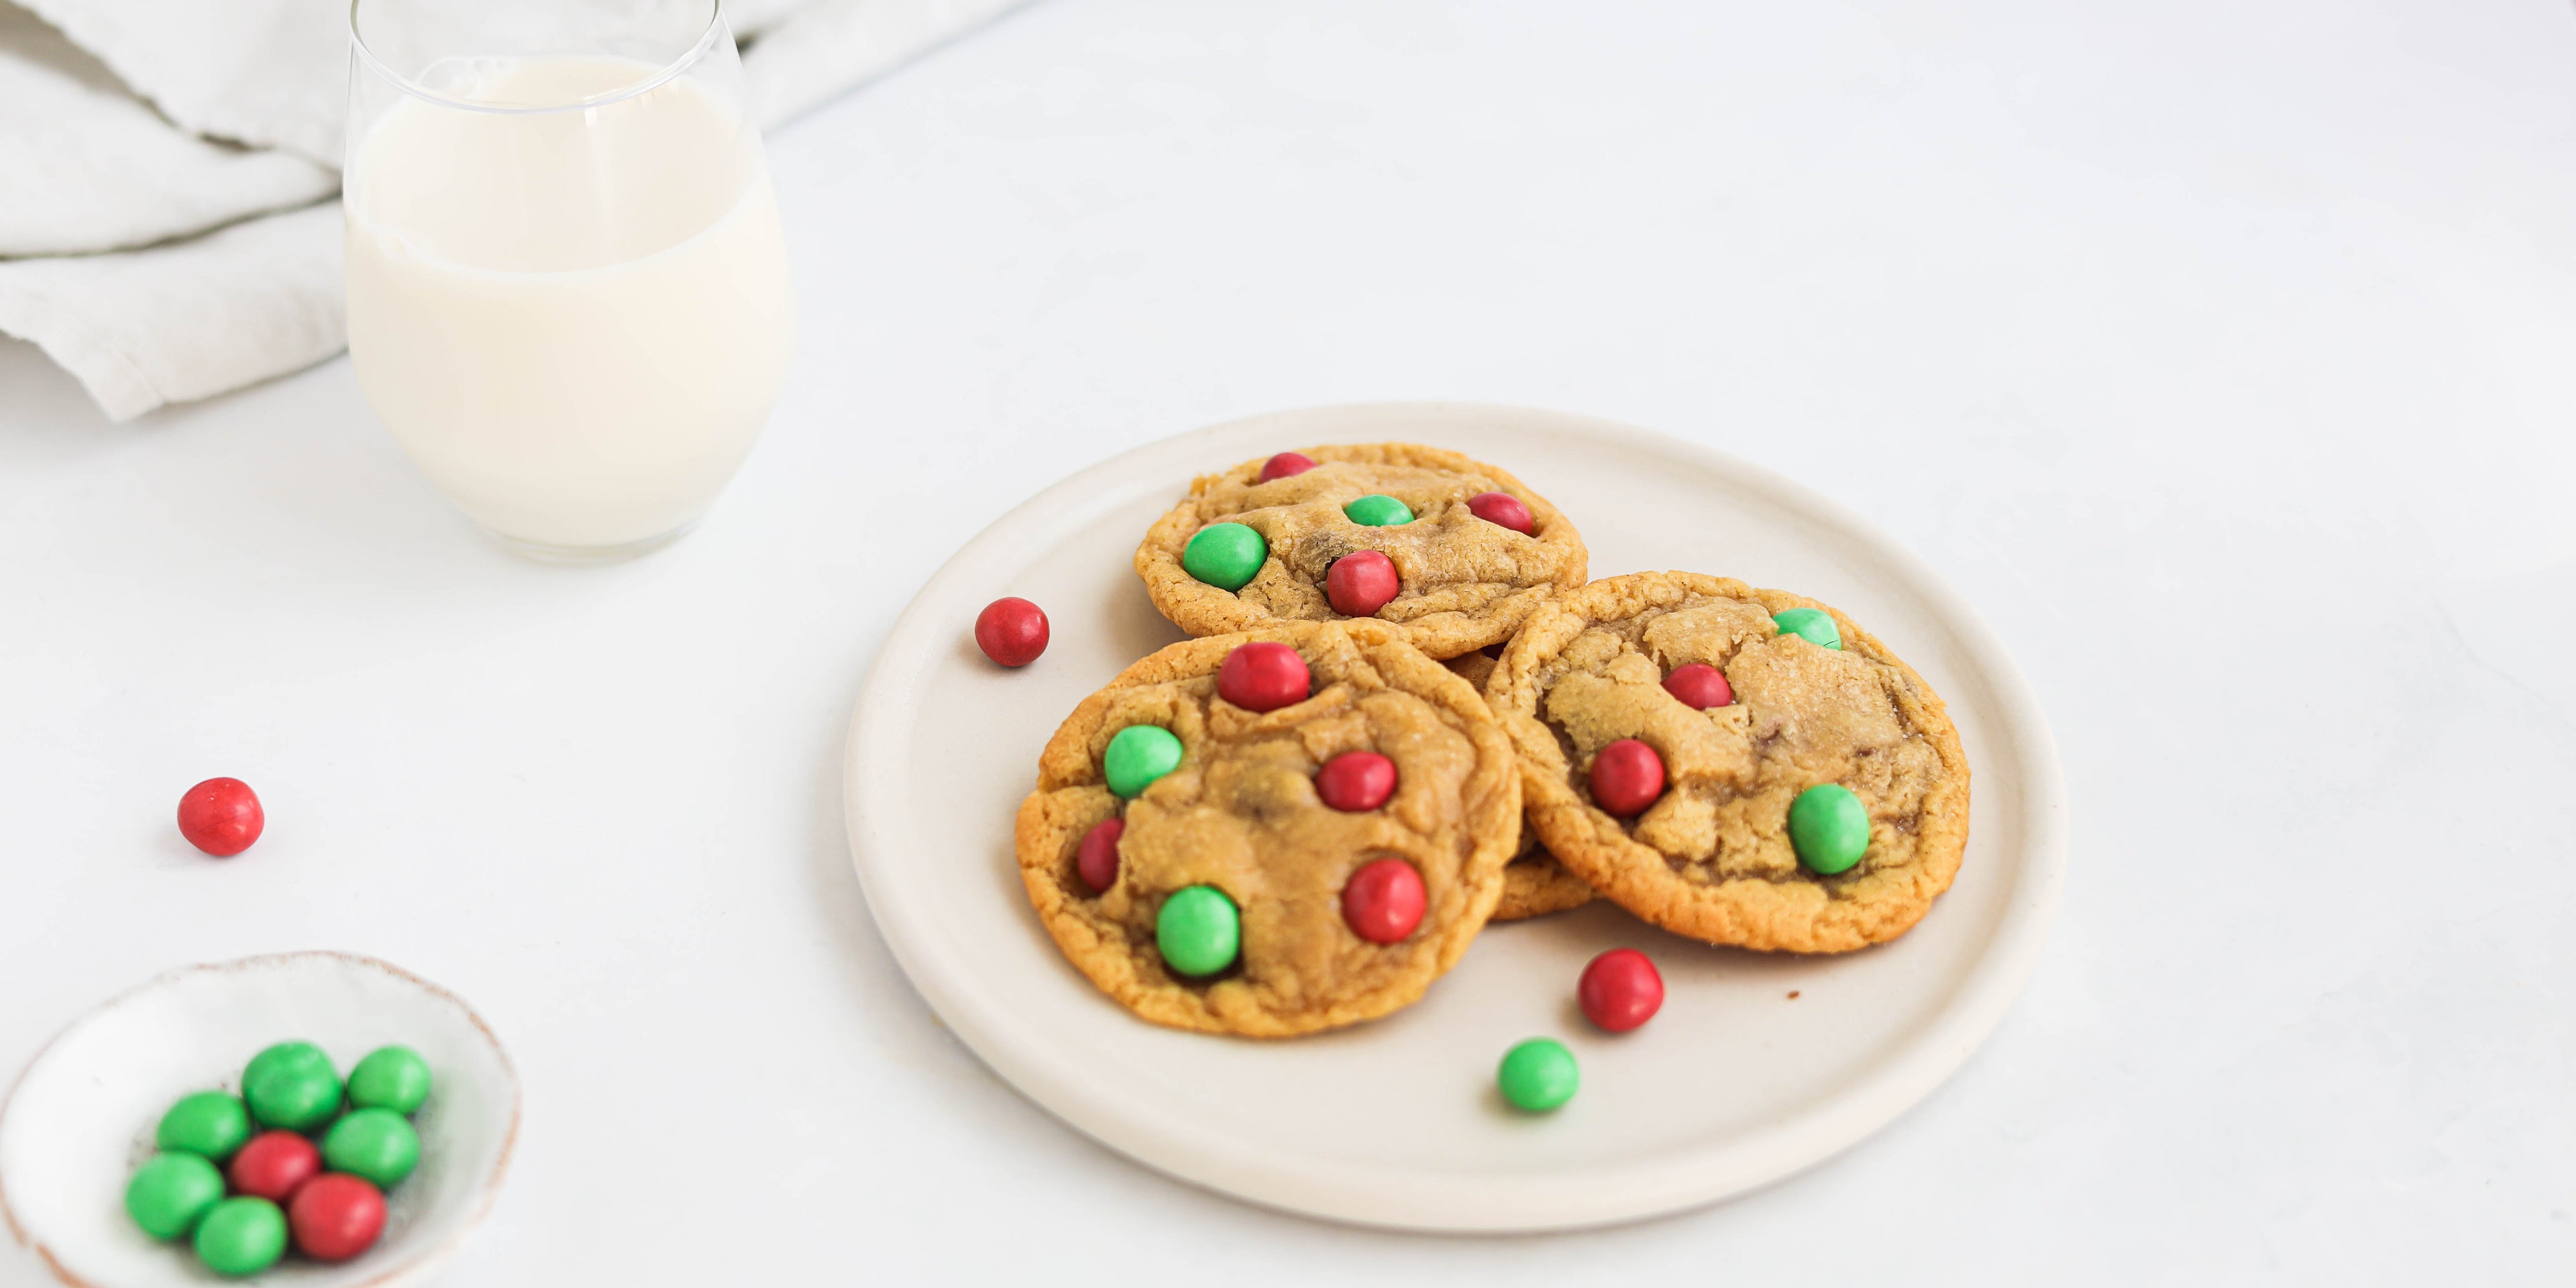 Copycat Millies Cookies Elf Style next to a glass of milk and dish of red and green m&ms